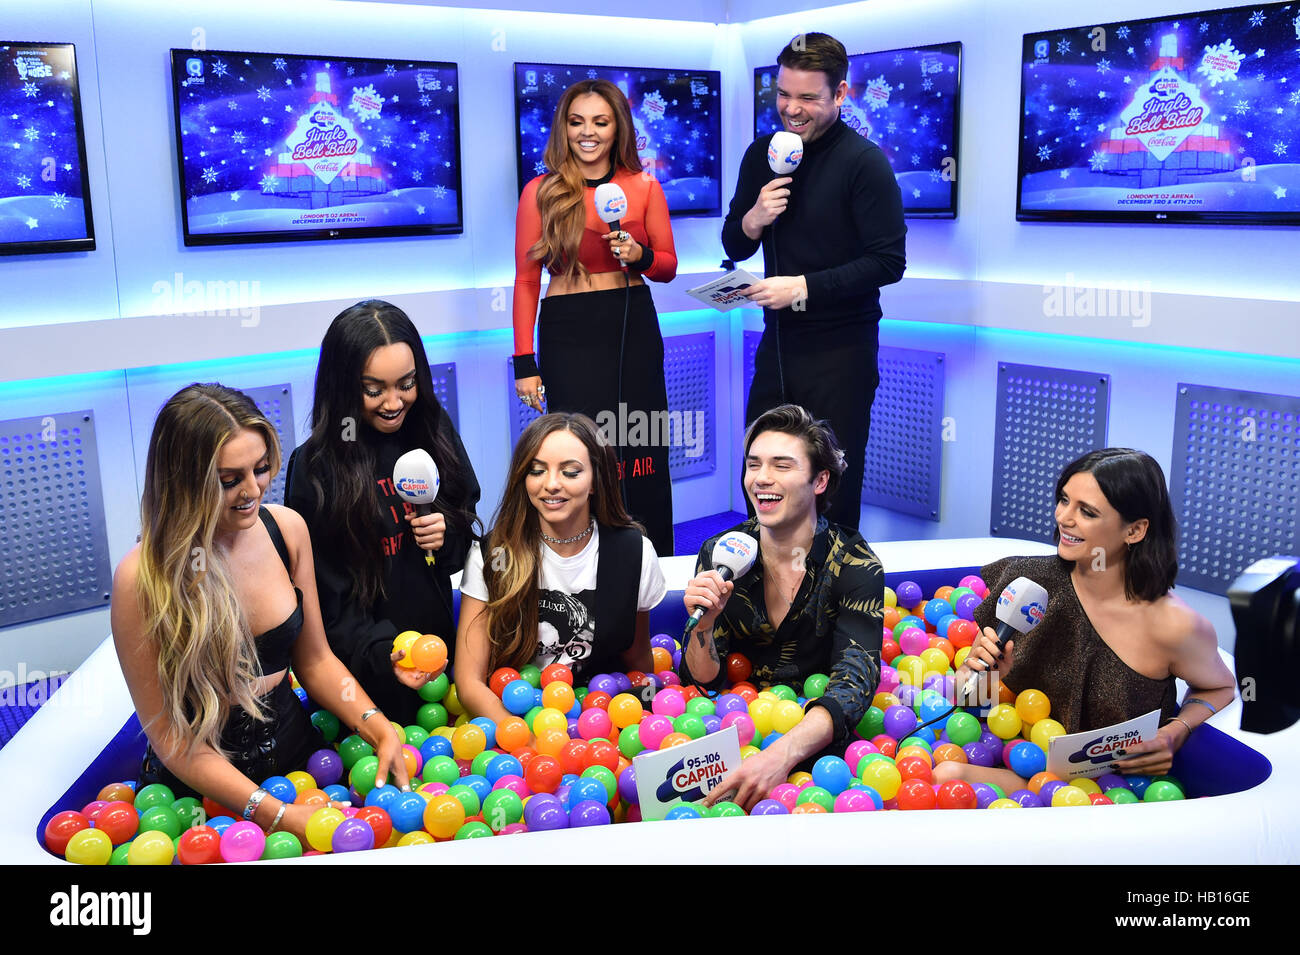 Little Mix are interviewed by the Capital Breakfast presenters Dave Berry, Lilah Parsons and George Shelley backstage during Capital's Jingle Bell Ball with Coca-Cola at London's O2 arena. Stock Photo